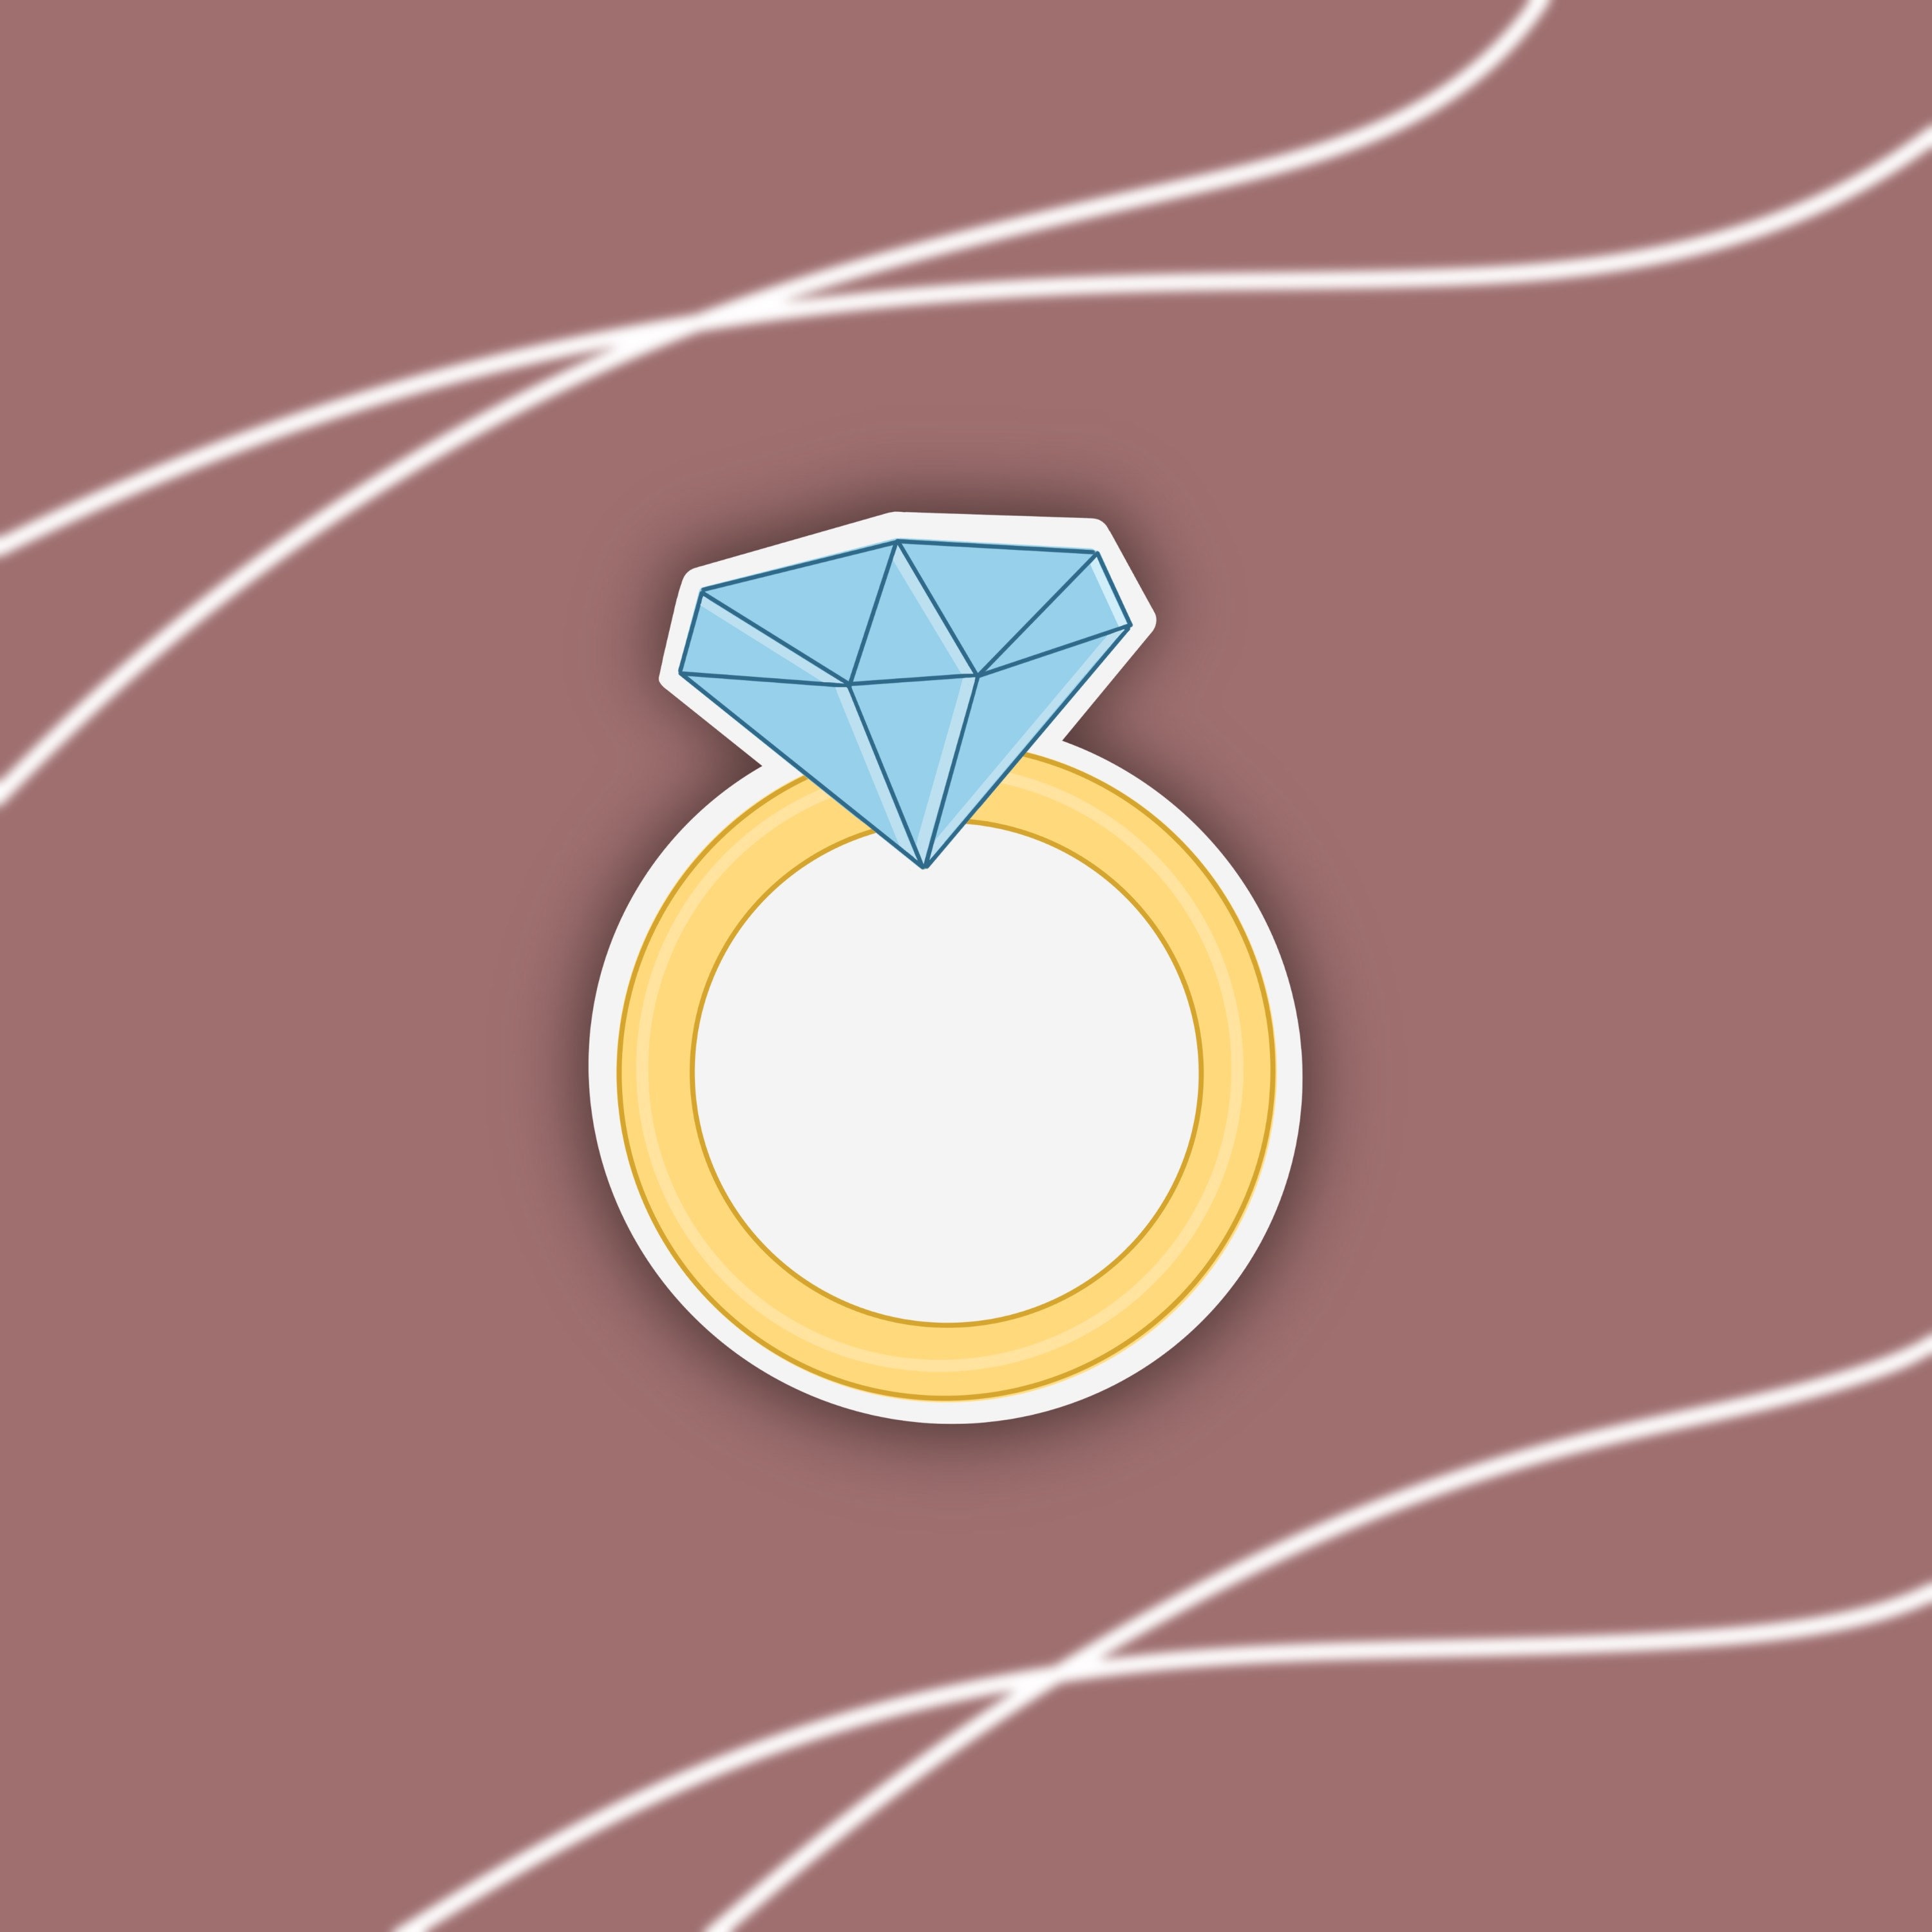 Wedding Ring Sticker by STRND BREDA for iOS & Android